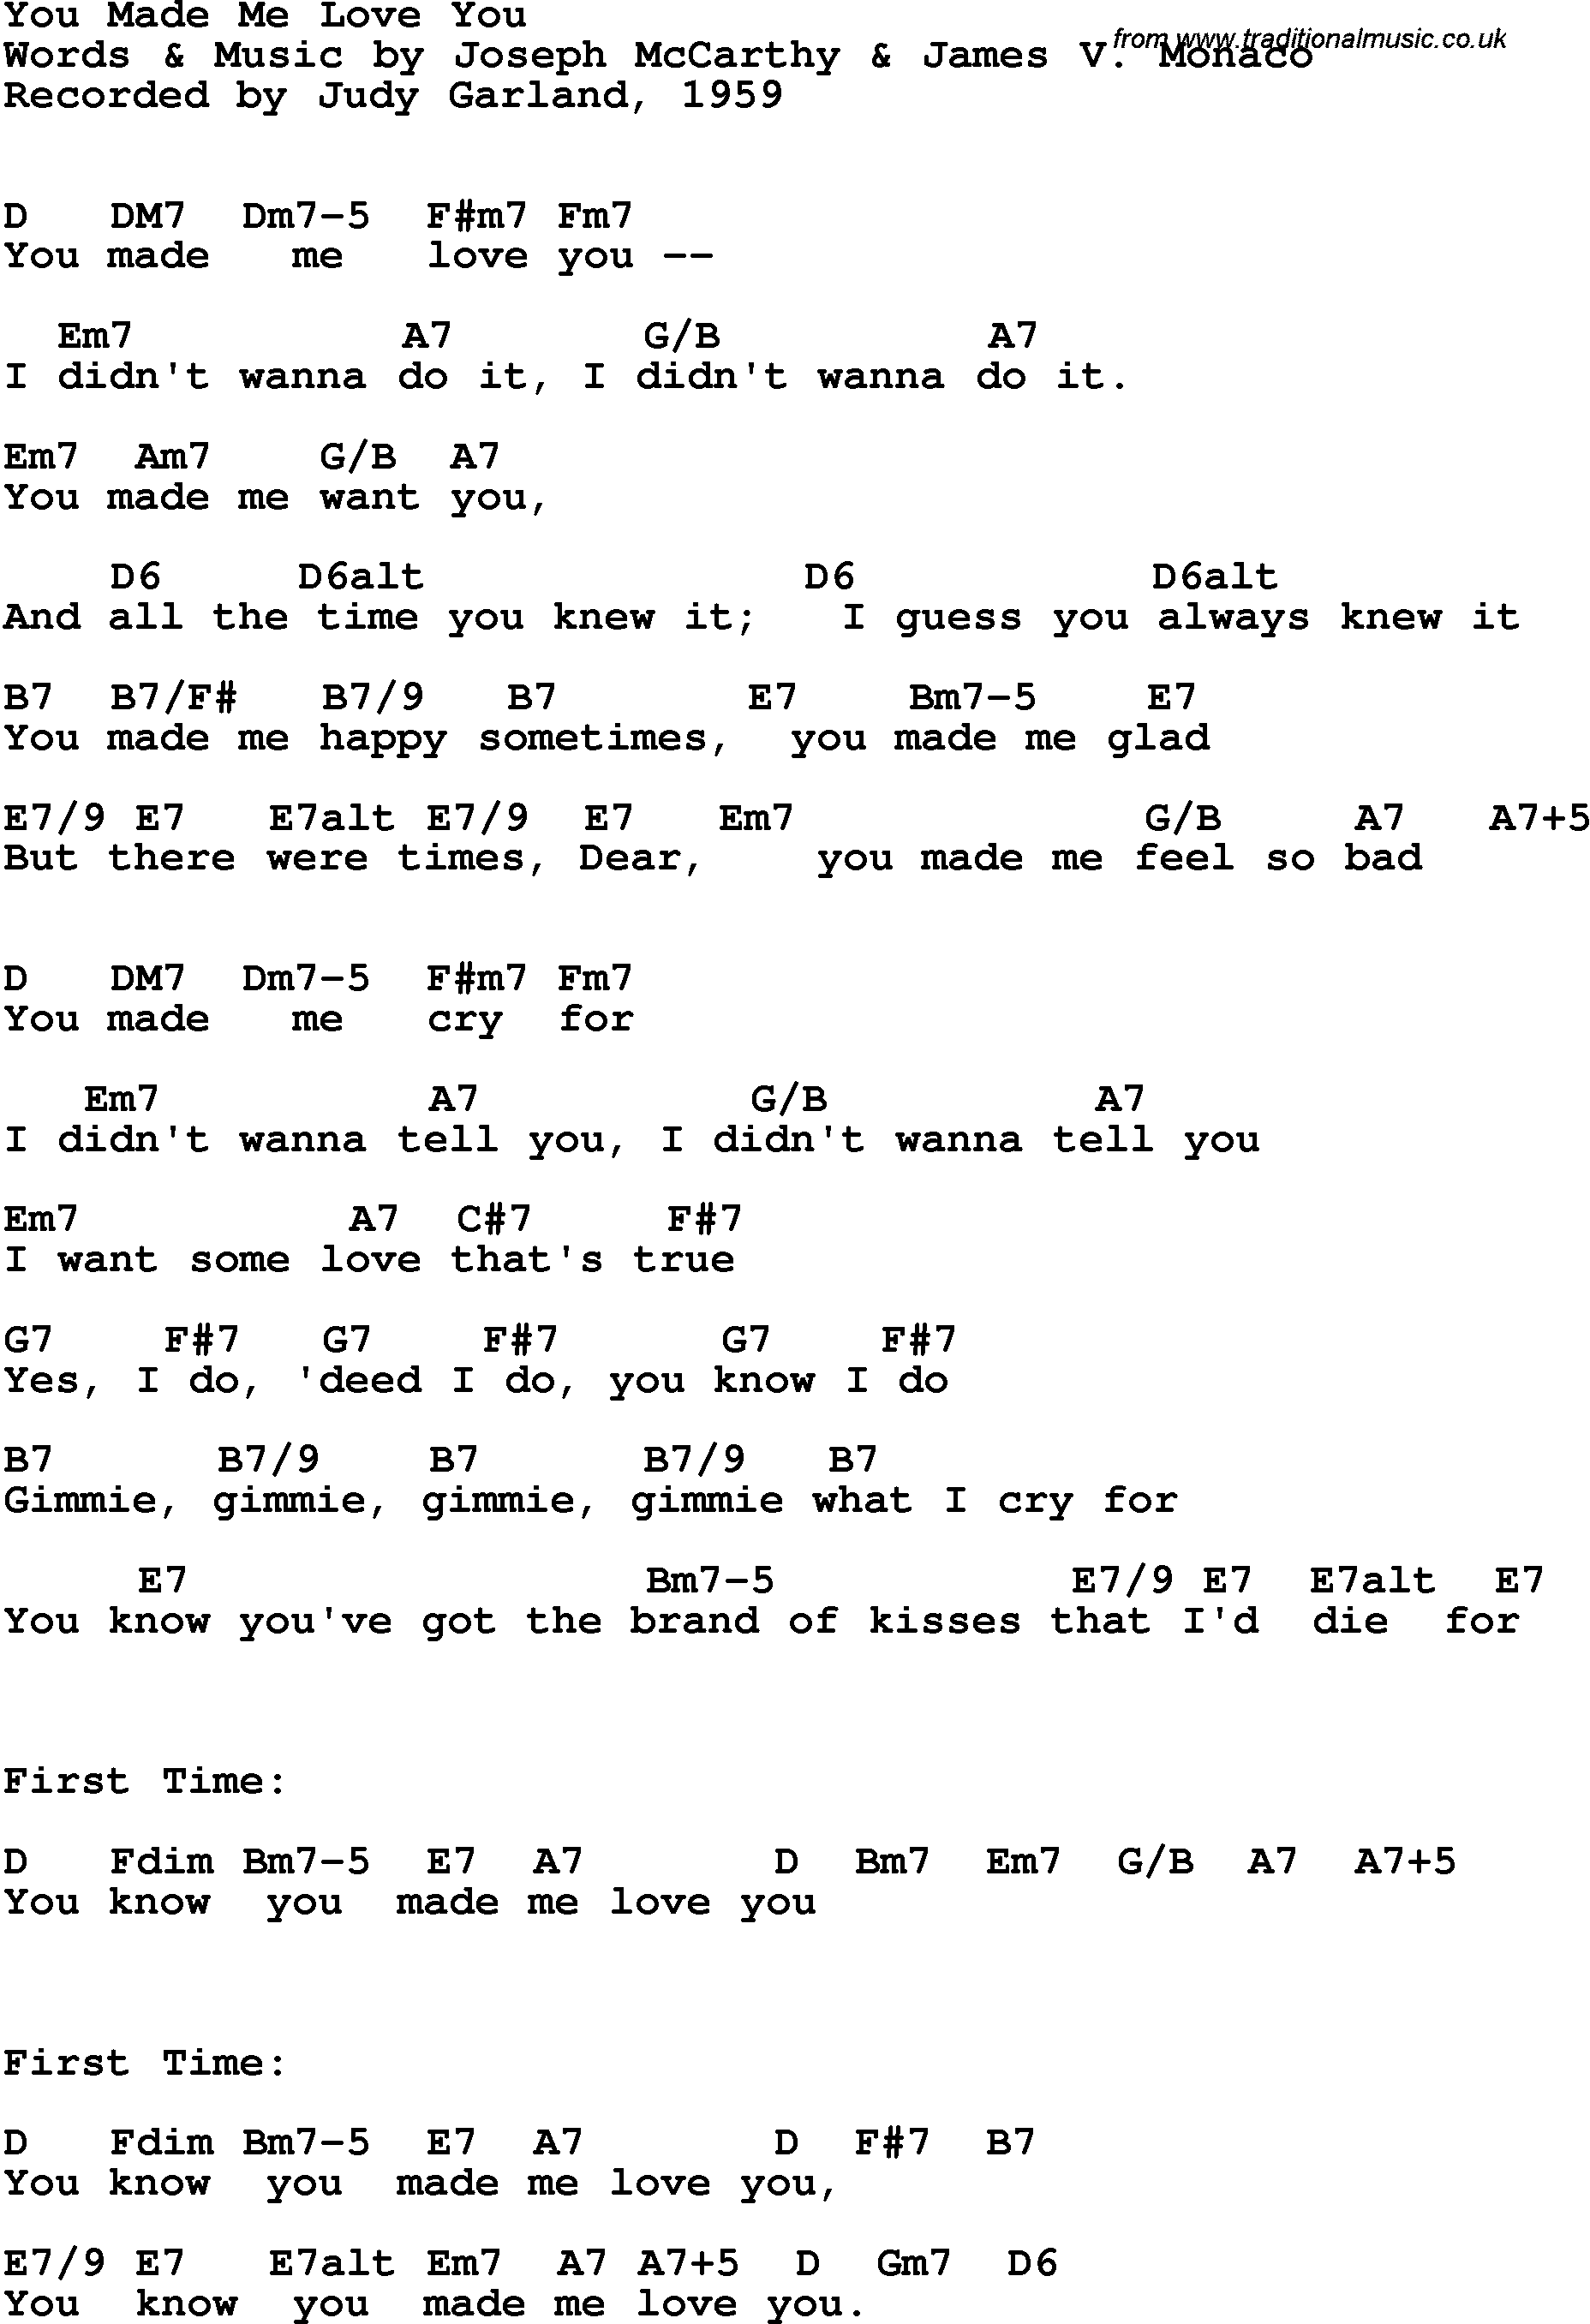 Song Lyrics with guitar chords for You Made Me Love You - Judy Garland, 1959